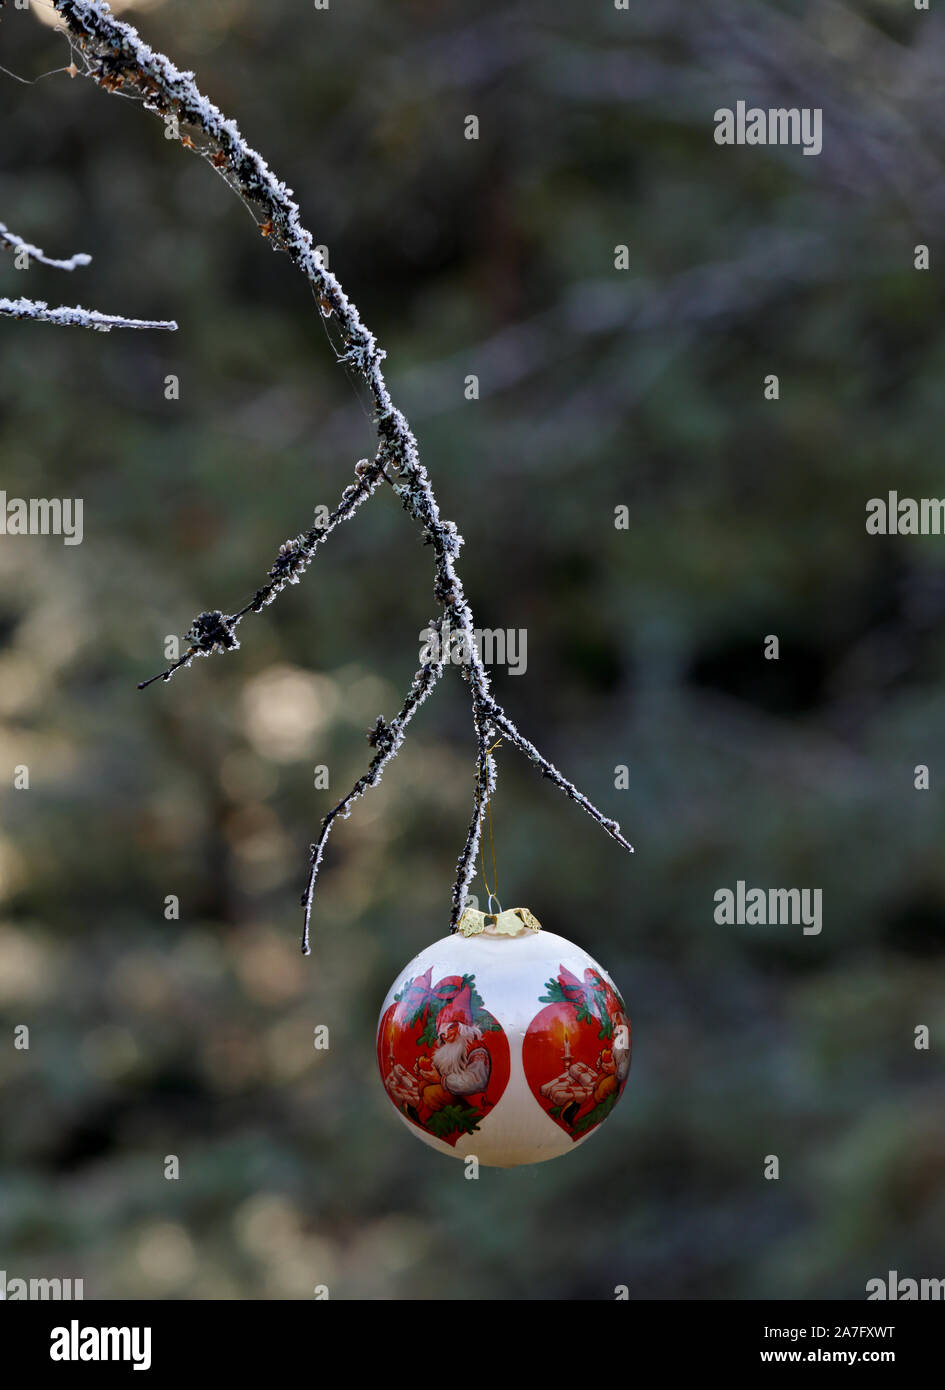 A white Christmas ball with red decorations hanging from a frosty birch branch Stock Photo